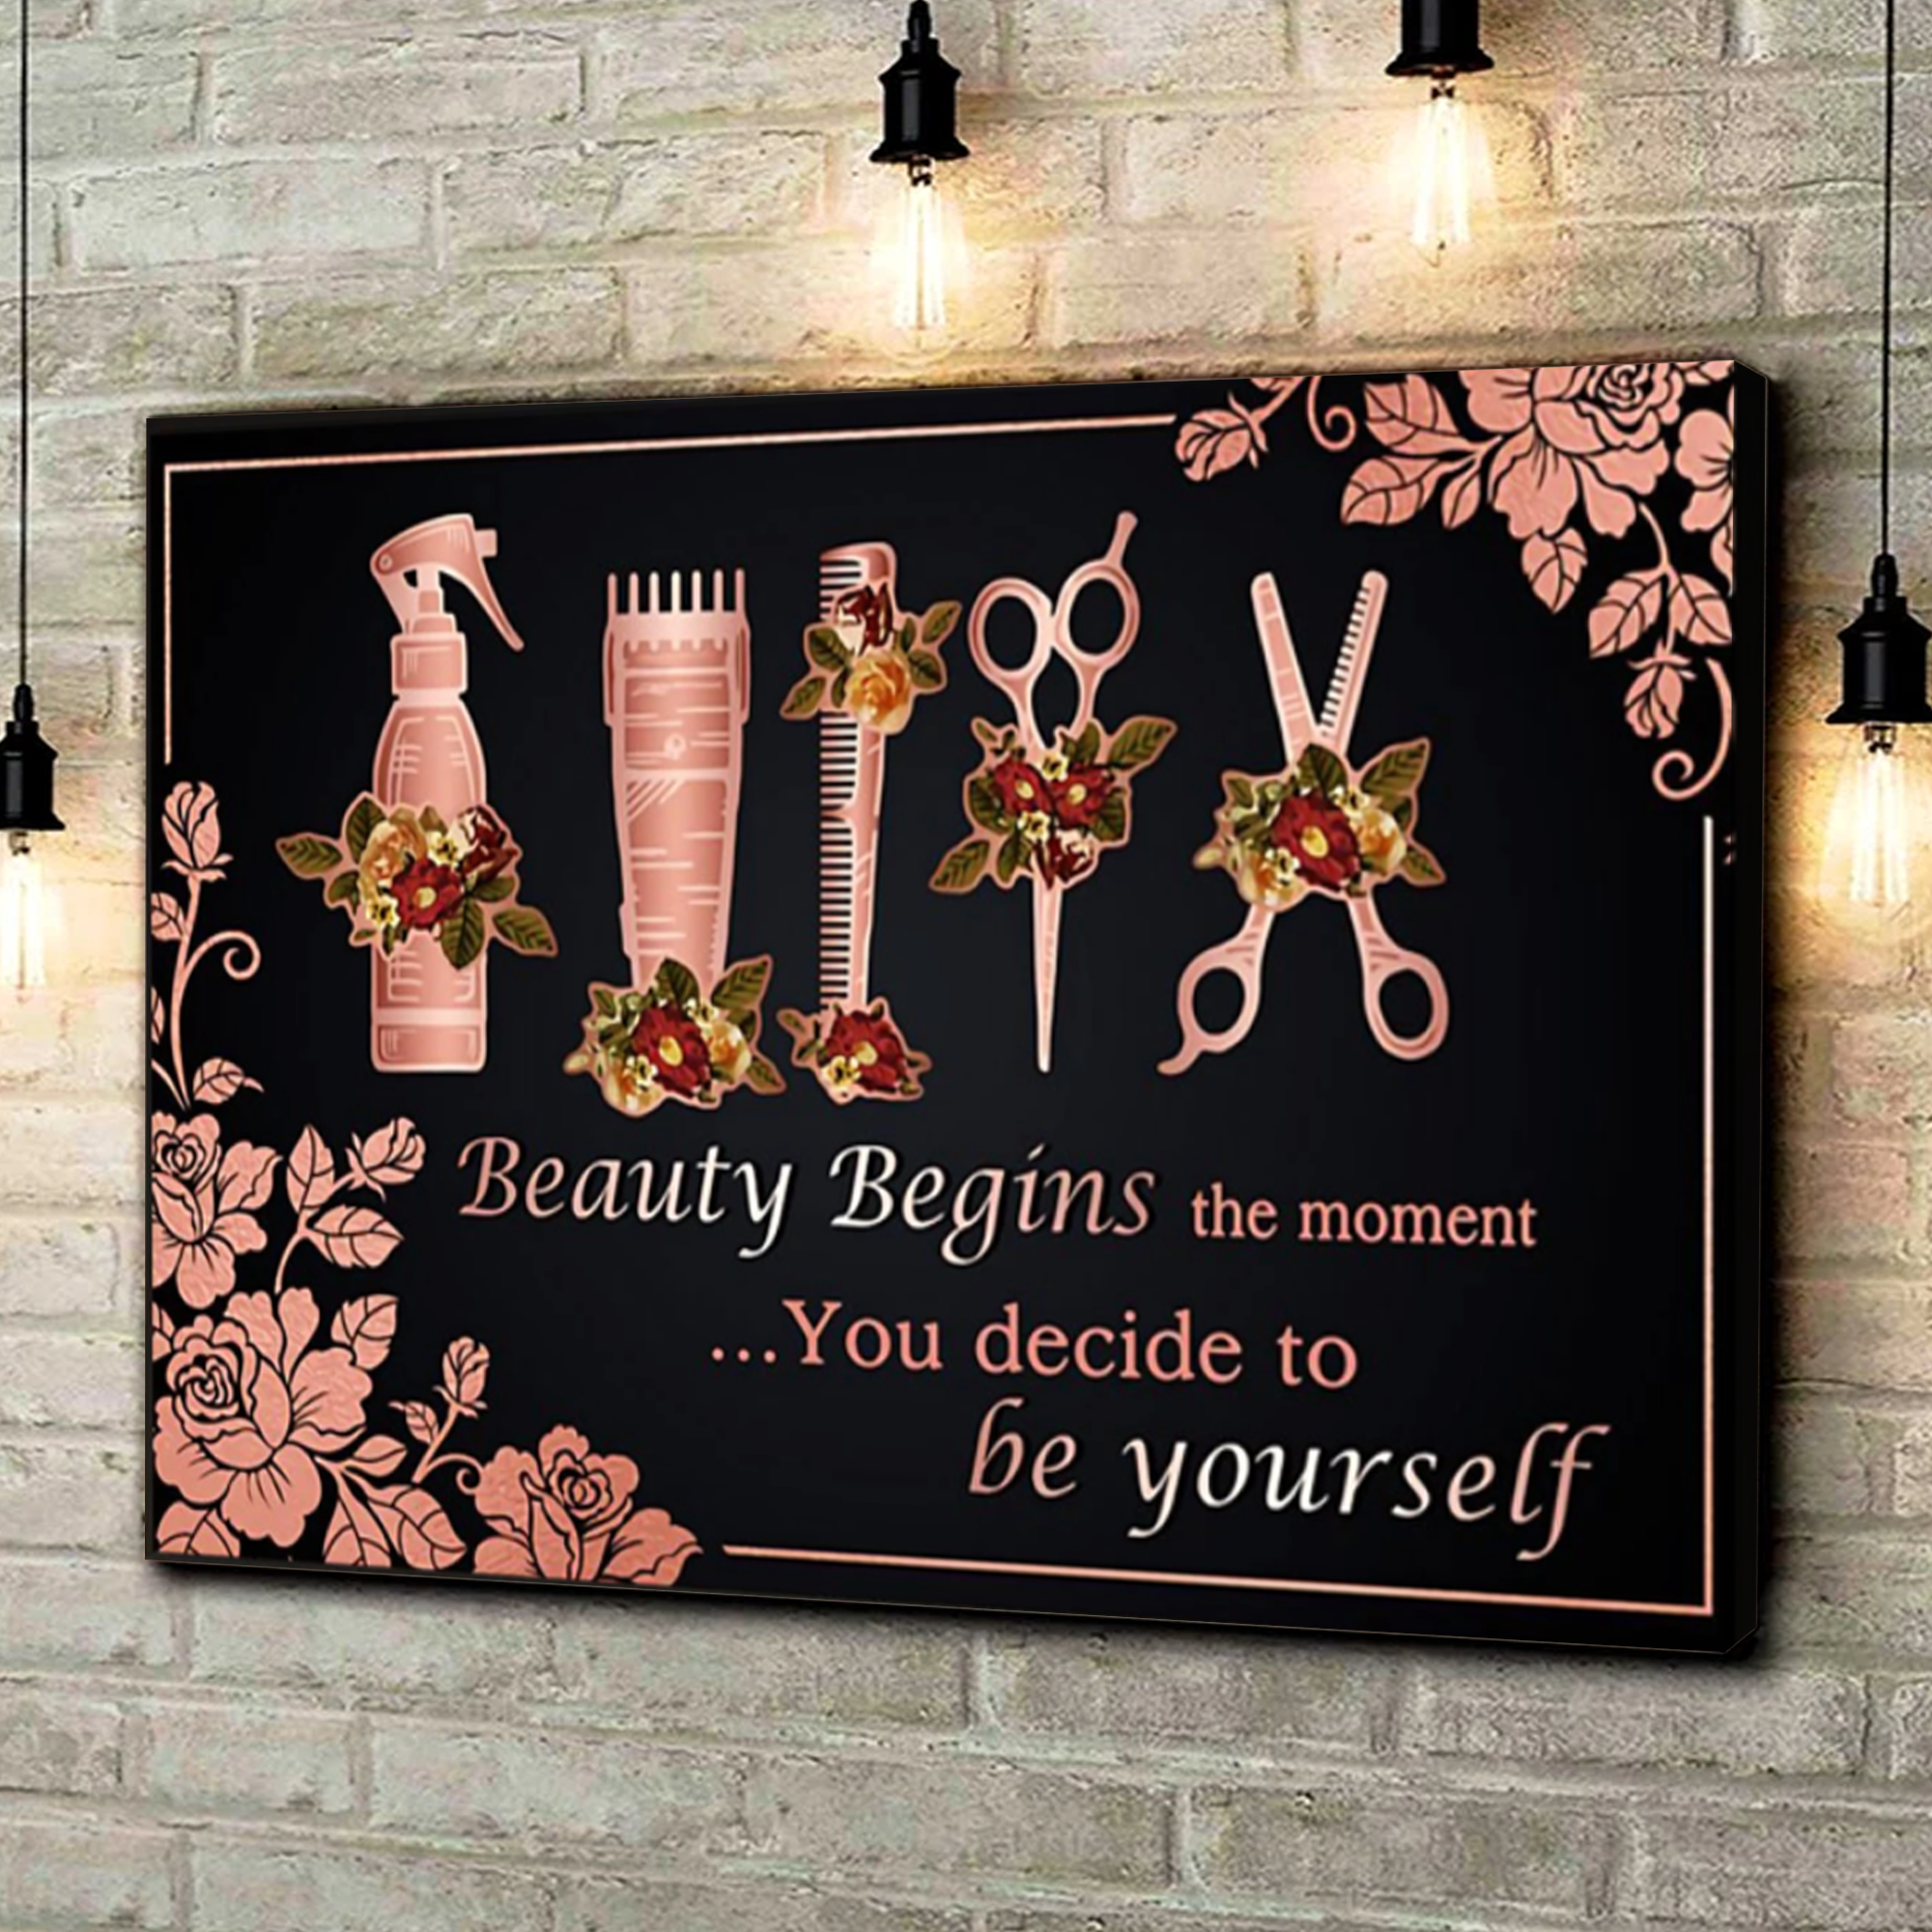 Hairstylist Canvas Wall Art – Beauty Begins The Moment You Decide To Be Yourself